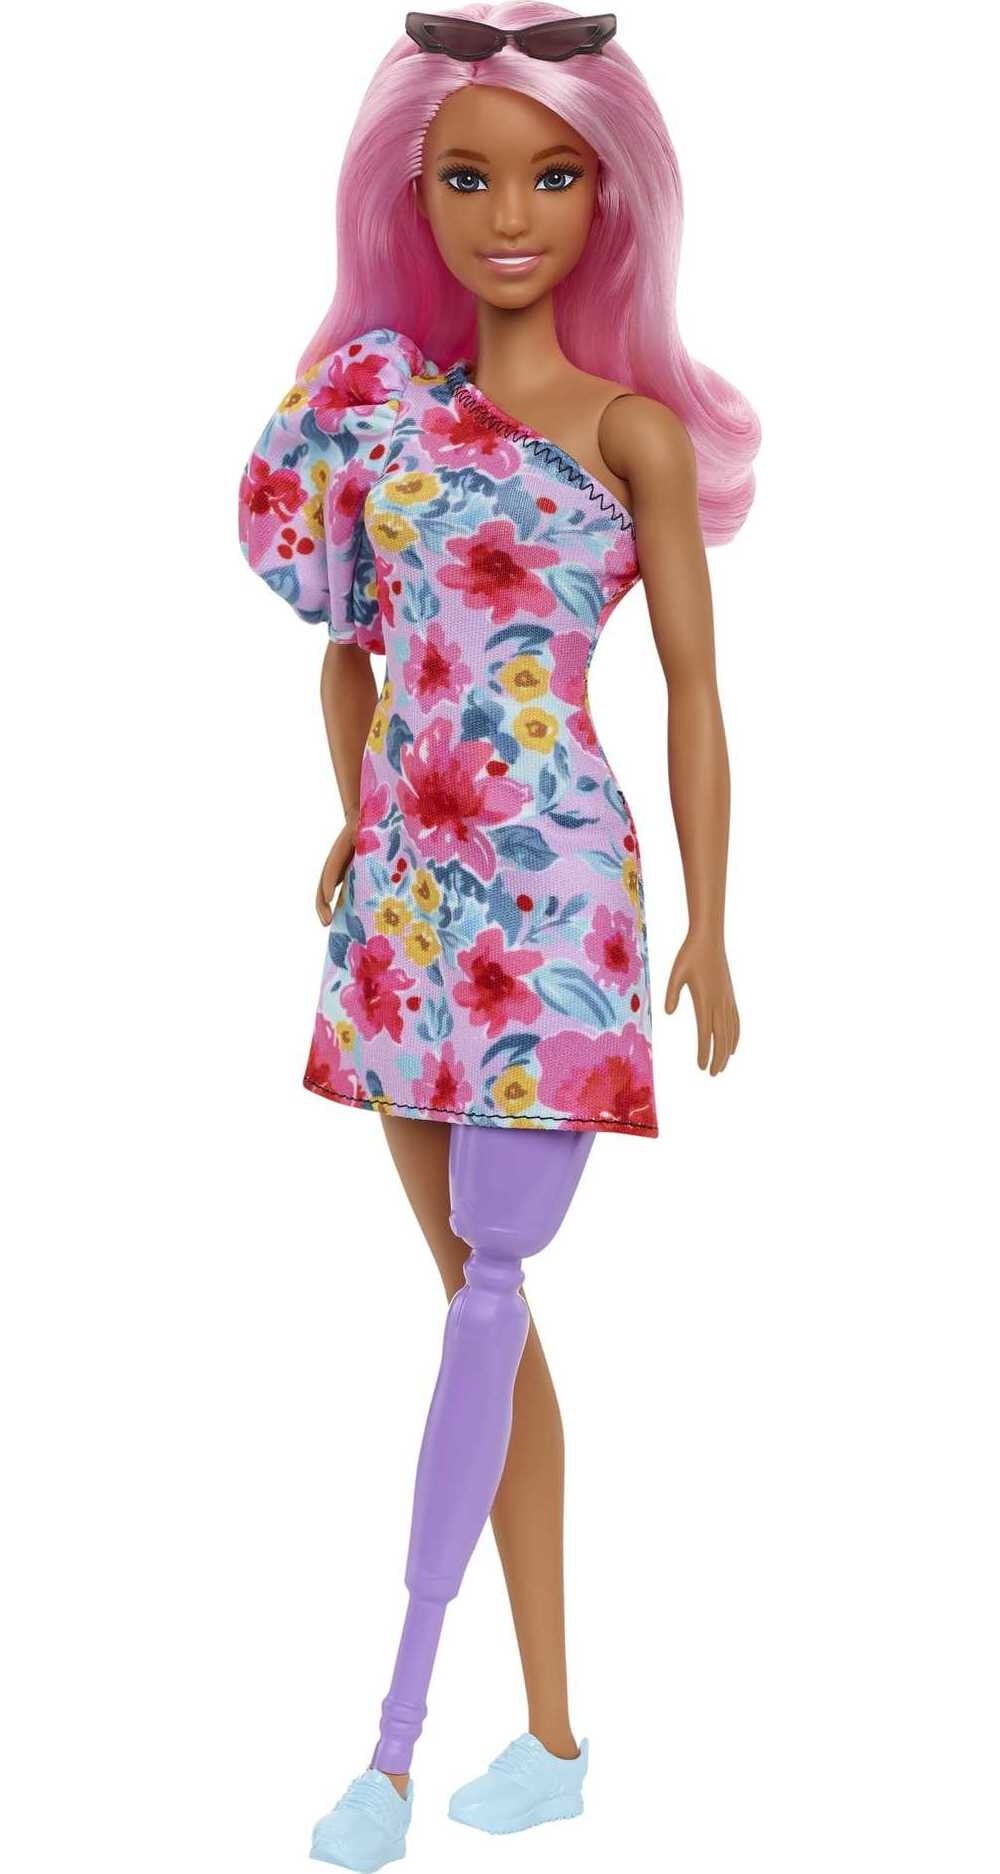 Barbie Fashionistas Doll #189 in Floral Dress with Prosthetic Leg, Pink Hair & Accessories